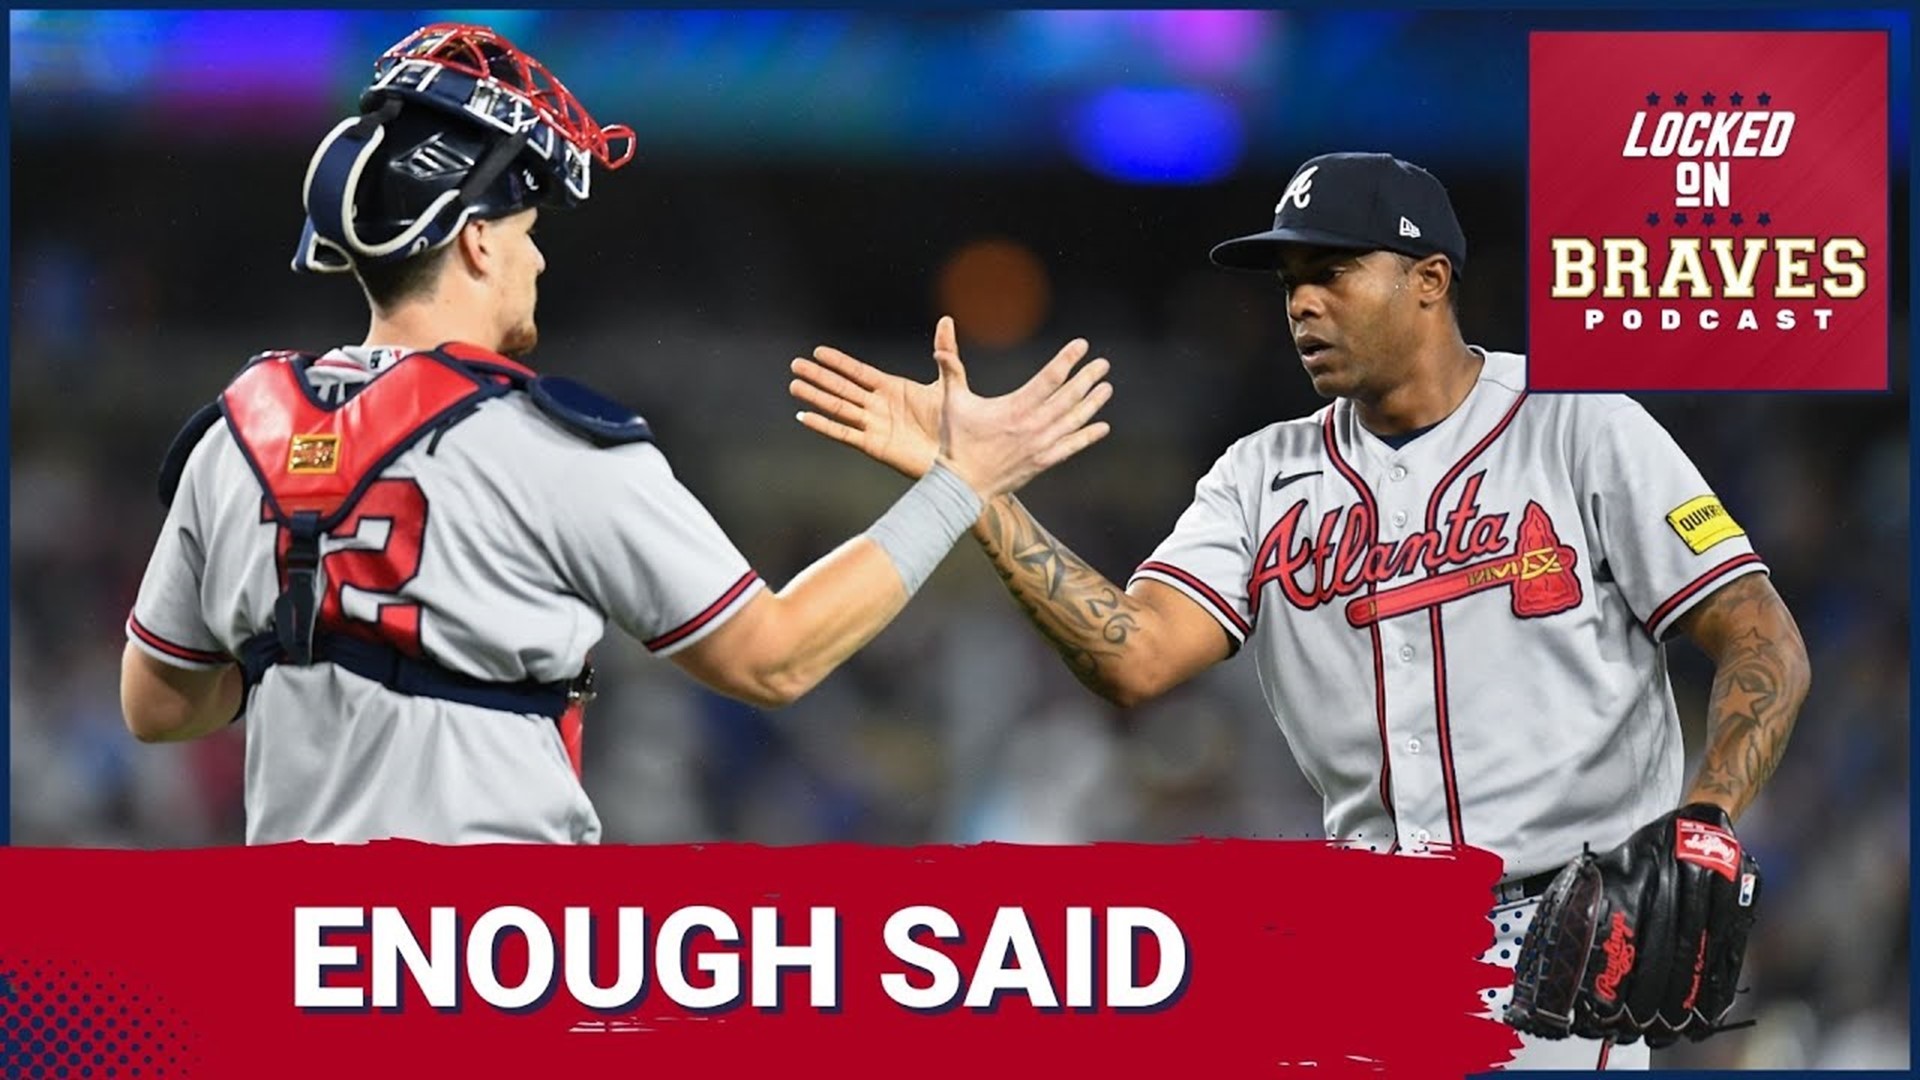 Ronald Acuna Makes MVP Case as Atlanta Braves Win Series Over Dodgers